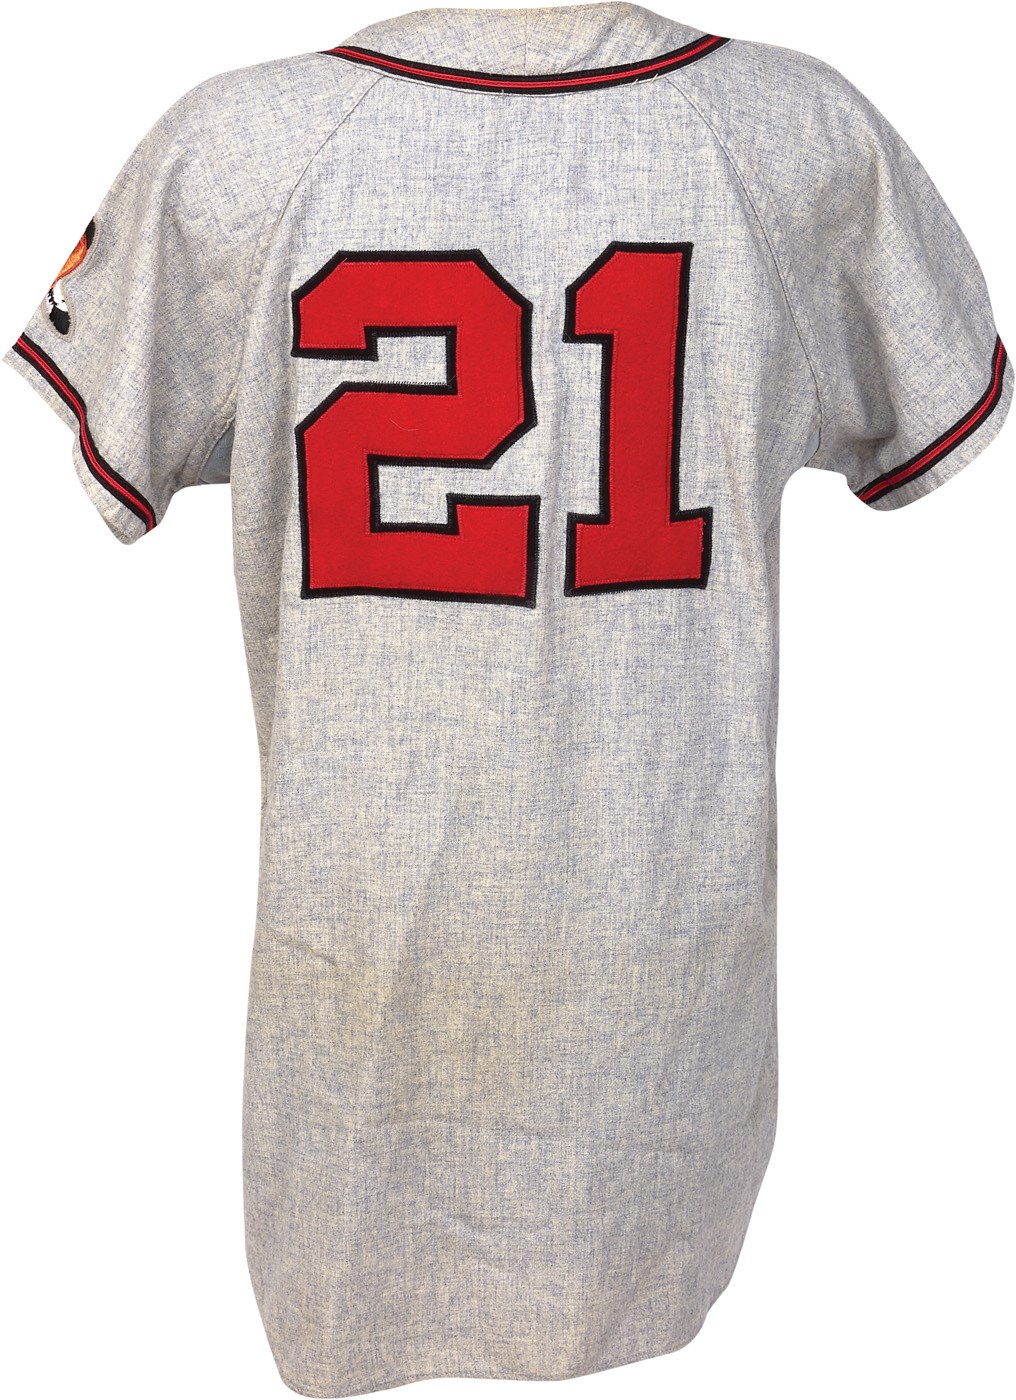 1962 Warren Spahn Milwaukee Braves Game Worn Jersey with LOA from Spahn  (MEARS 9.5)